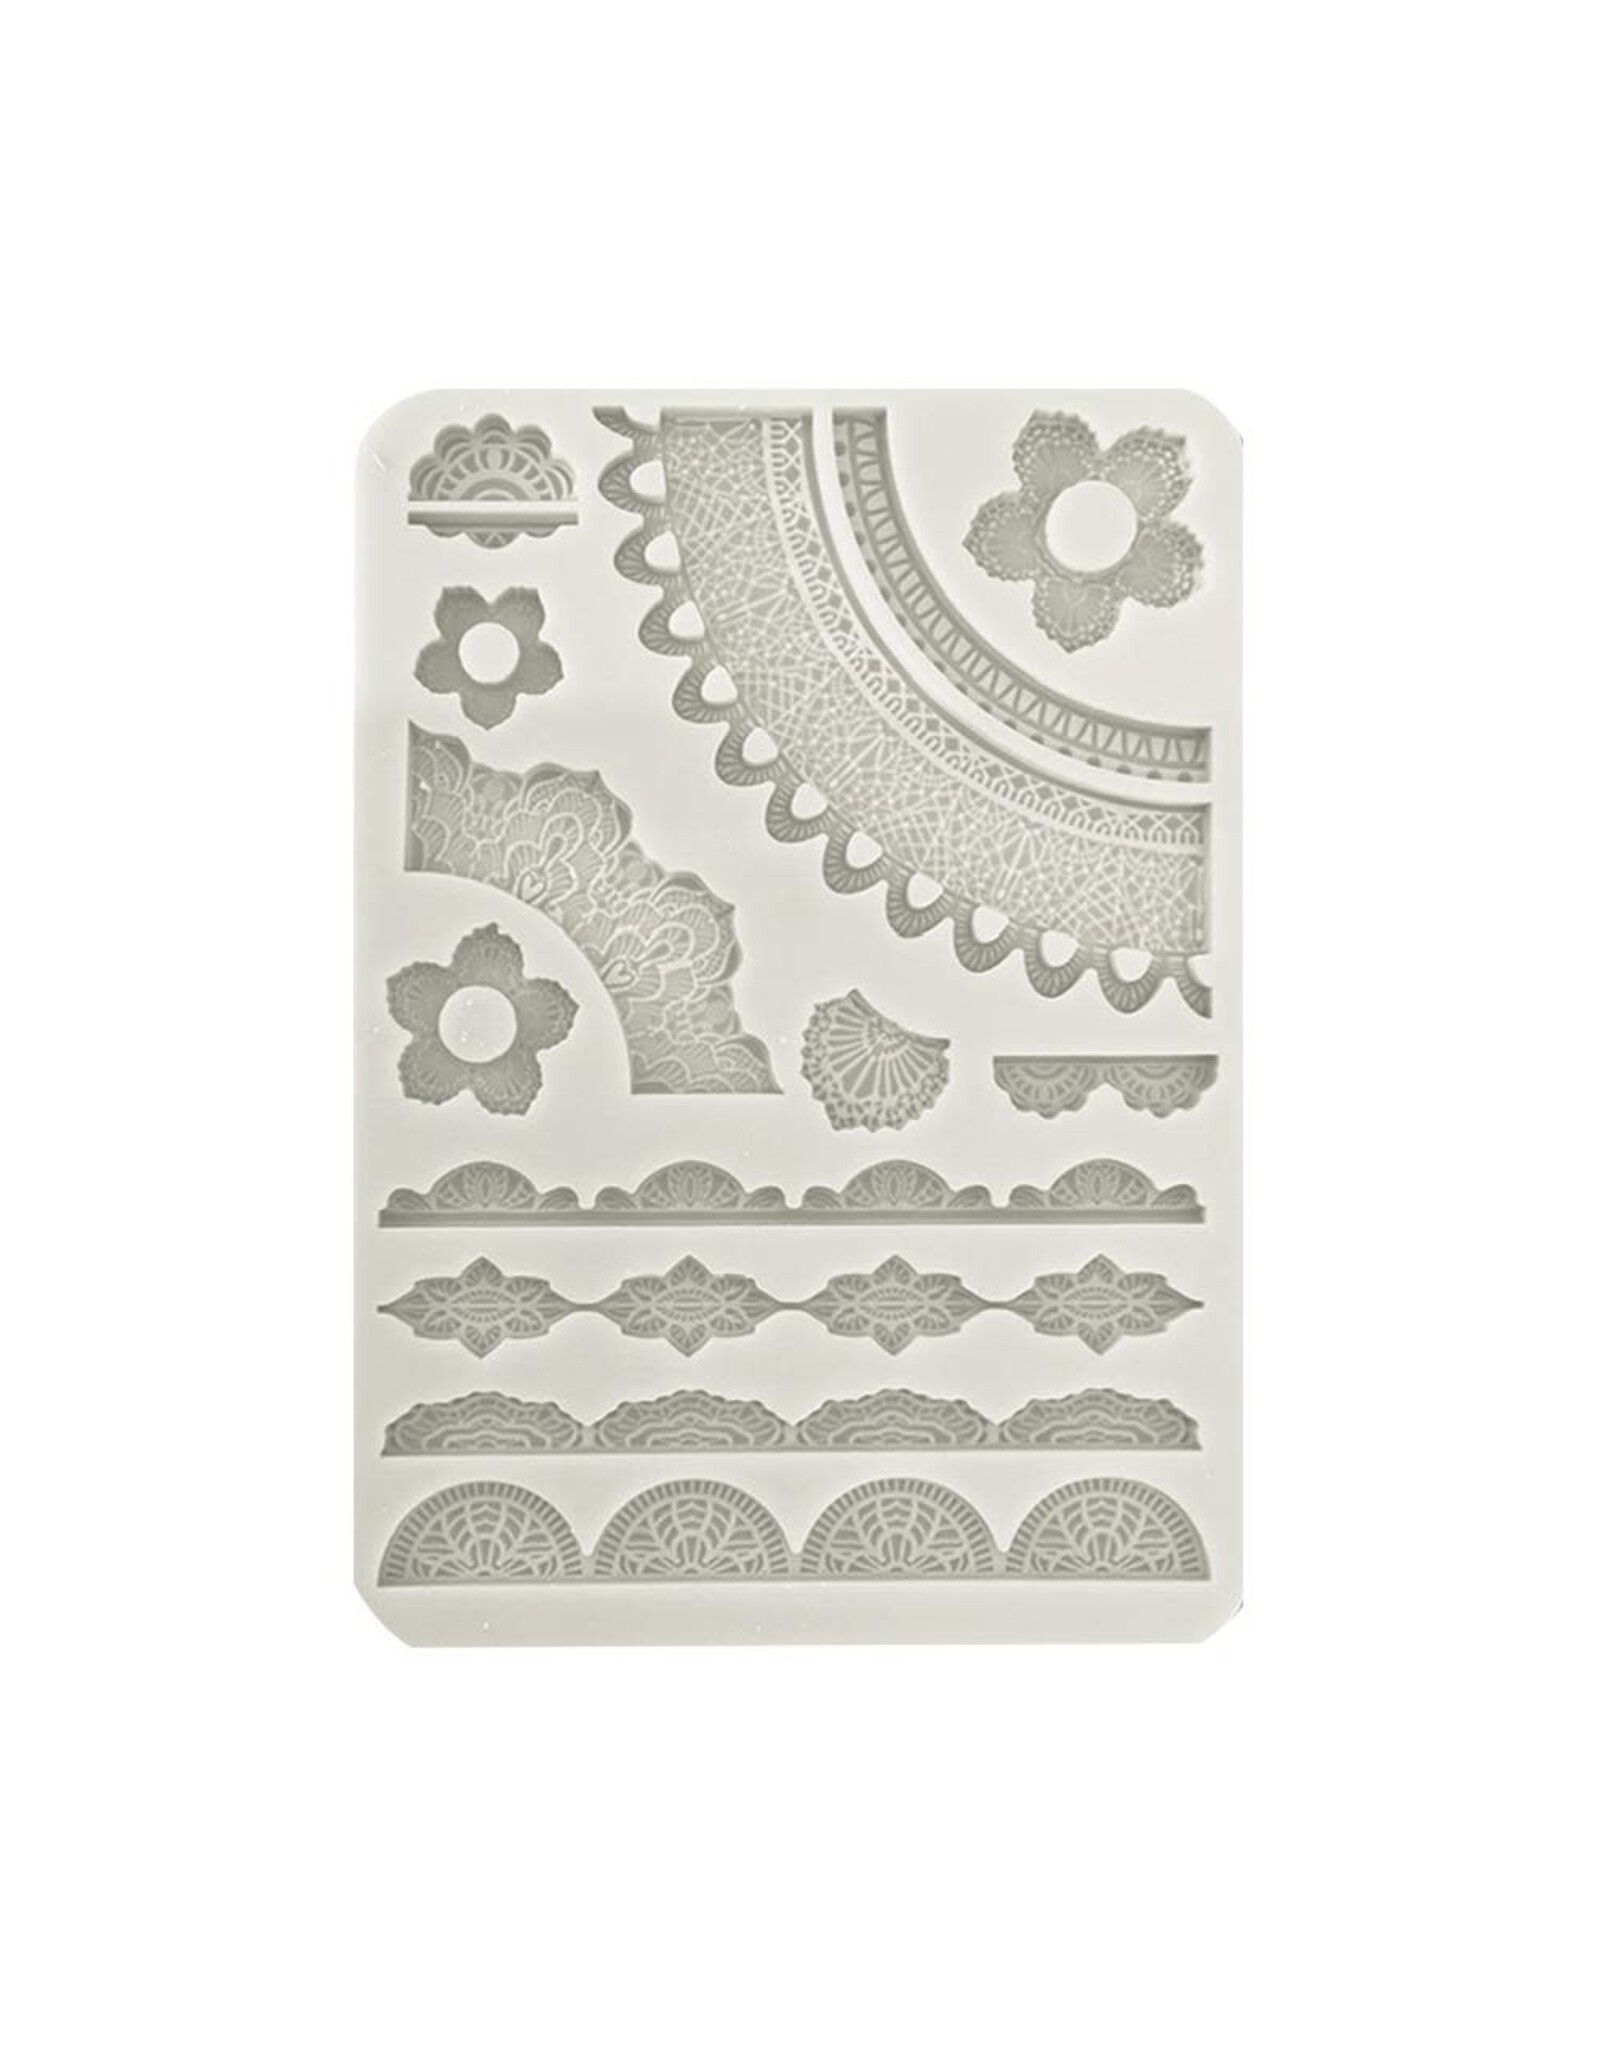 STAMPERIA STAMPERIA VICKY PAPAIOANNOU CREATE HAPPINESS SECRET DIARY LACE BORDERS A6 SILICONE MOULD